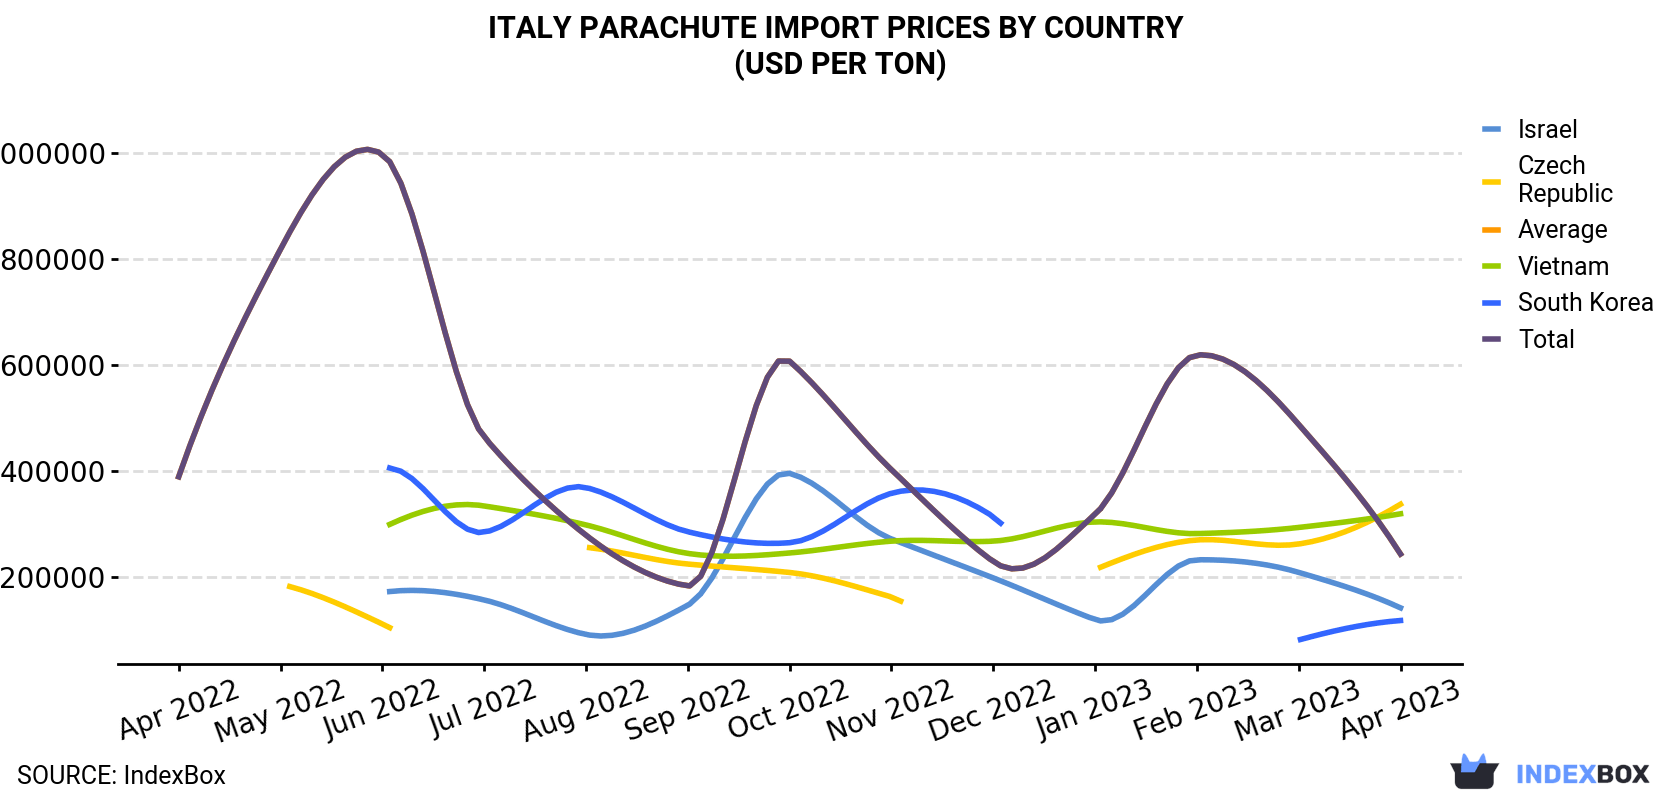 Italy Parachute Import Prices By Country (USD Per Ton)